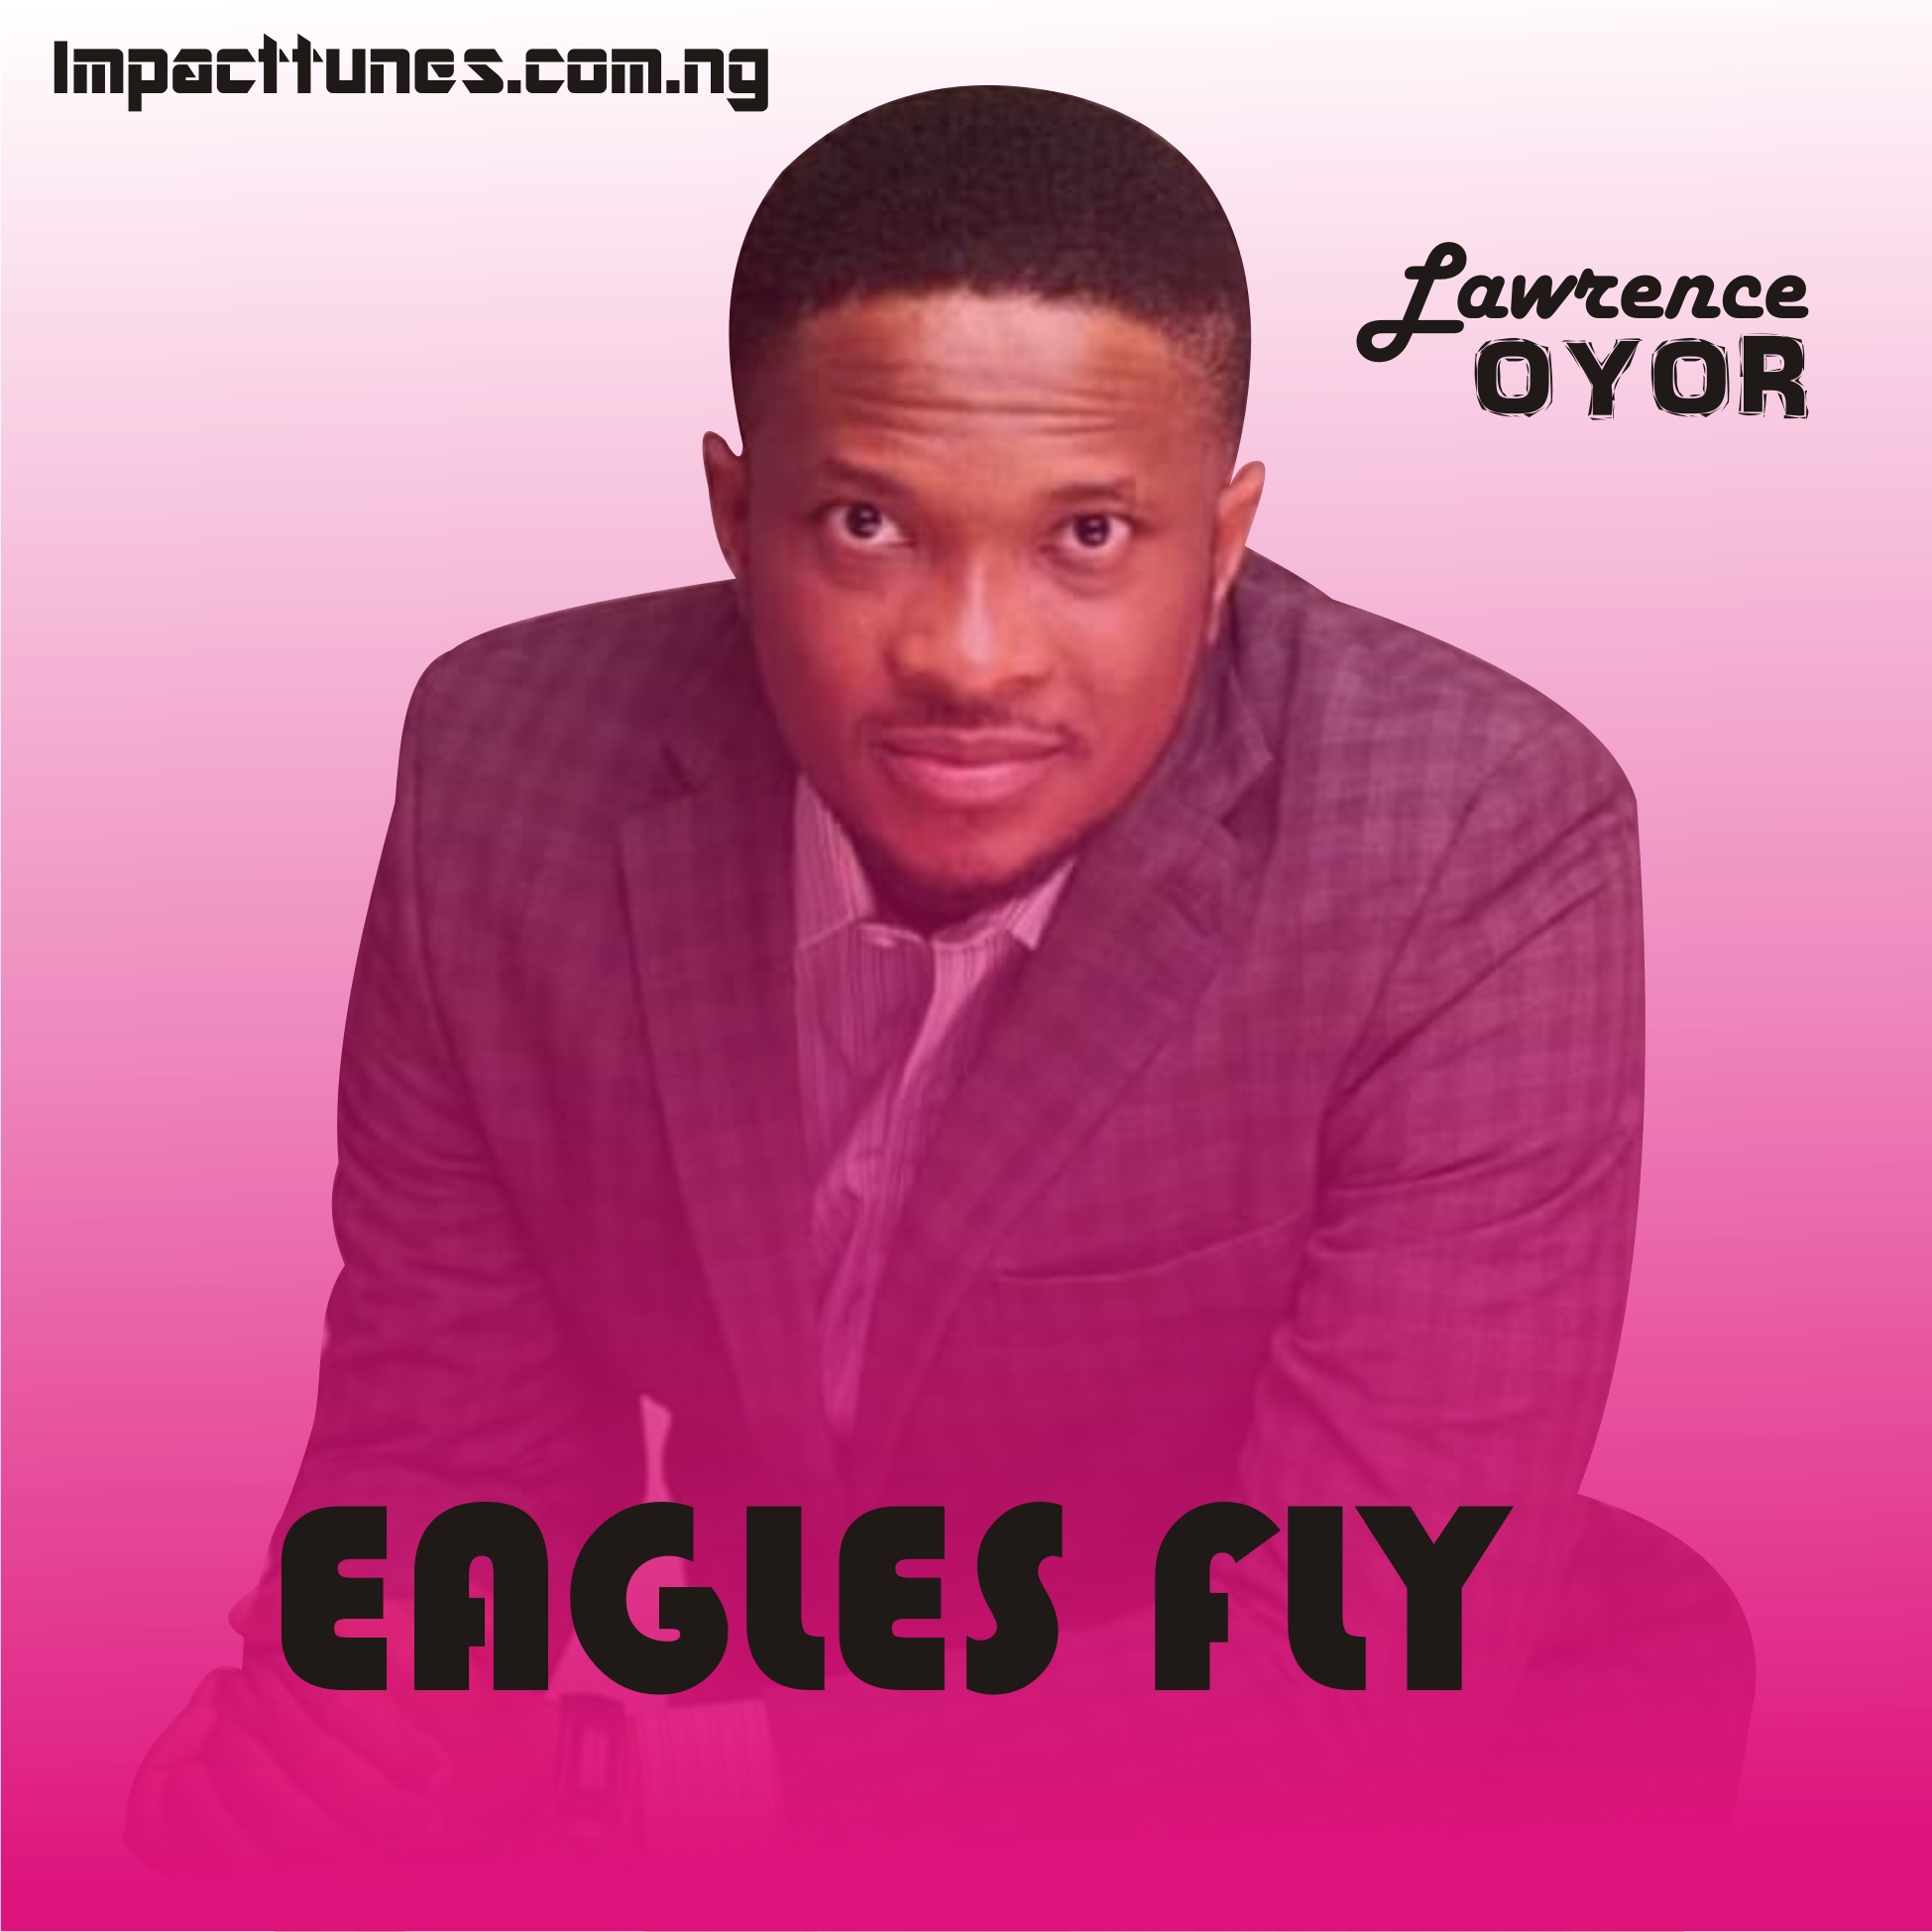 Download Chant: Eagles Fly | Lawrence Oyor [Mp3]